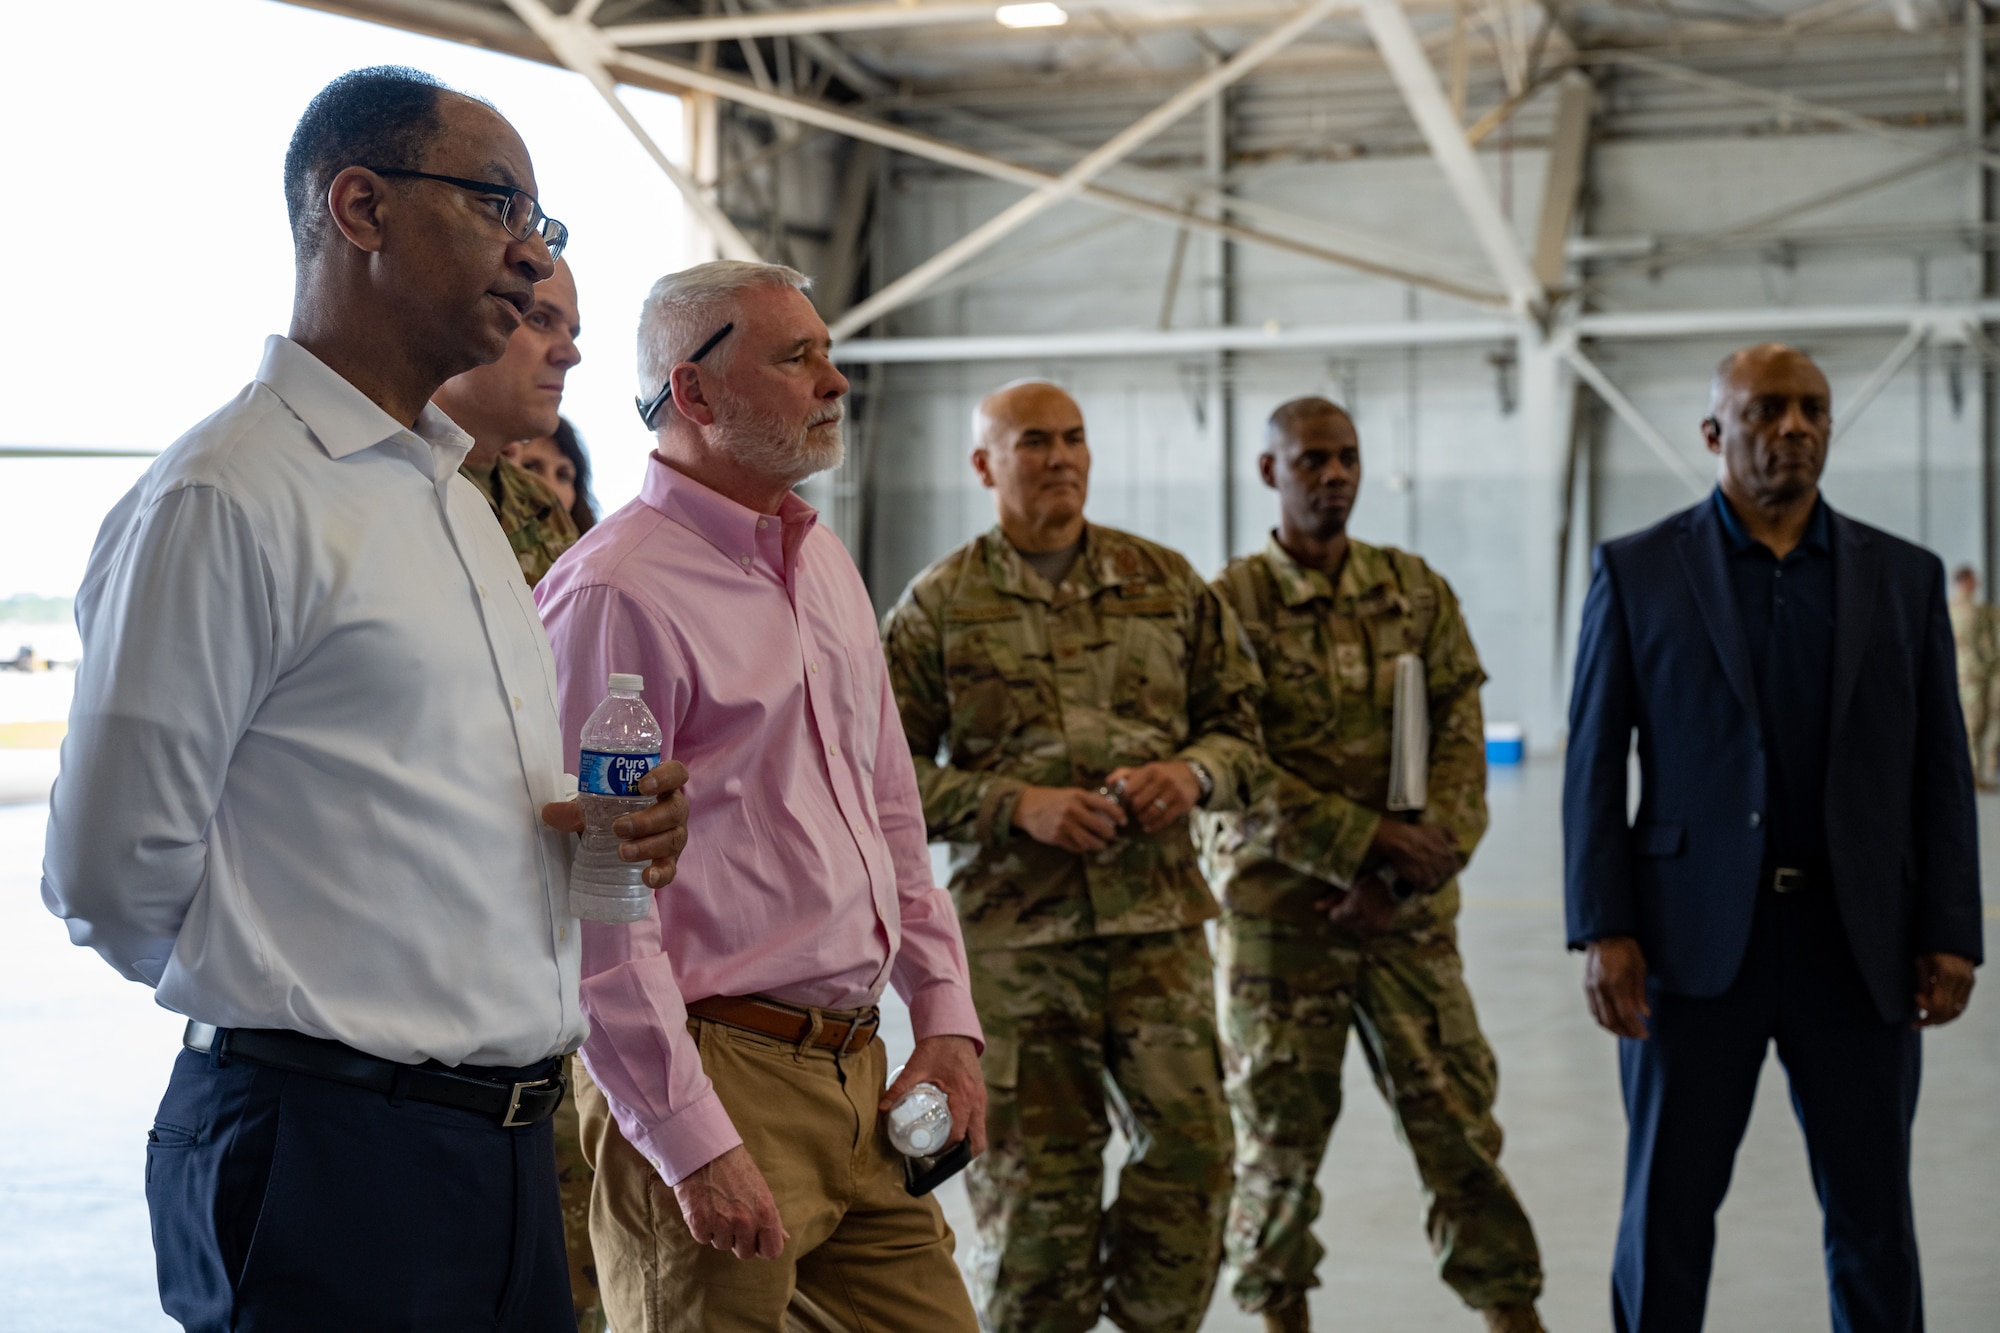 Carlos Rodgers, left, the Principal Deputy Assistant Secretary for Financial Management and Comptroller, met with base leaders and senior leaders from across the Financial Management community at Hurlburt Field, Fla., April 5, 2023. The executive session participants discussed the strategic issues and priorities impacting the financial management career field and the Department of the Air Force. (U.S. Air Force photo by Airman 1st Class Alysa Knott)